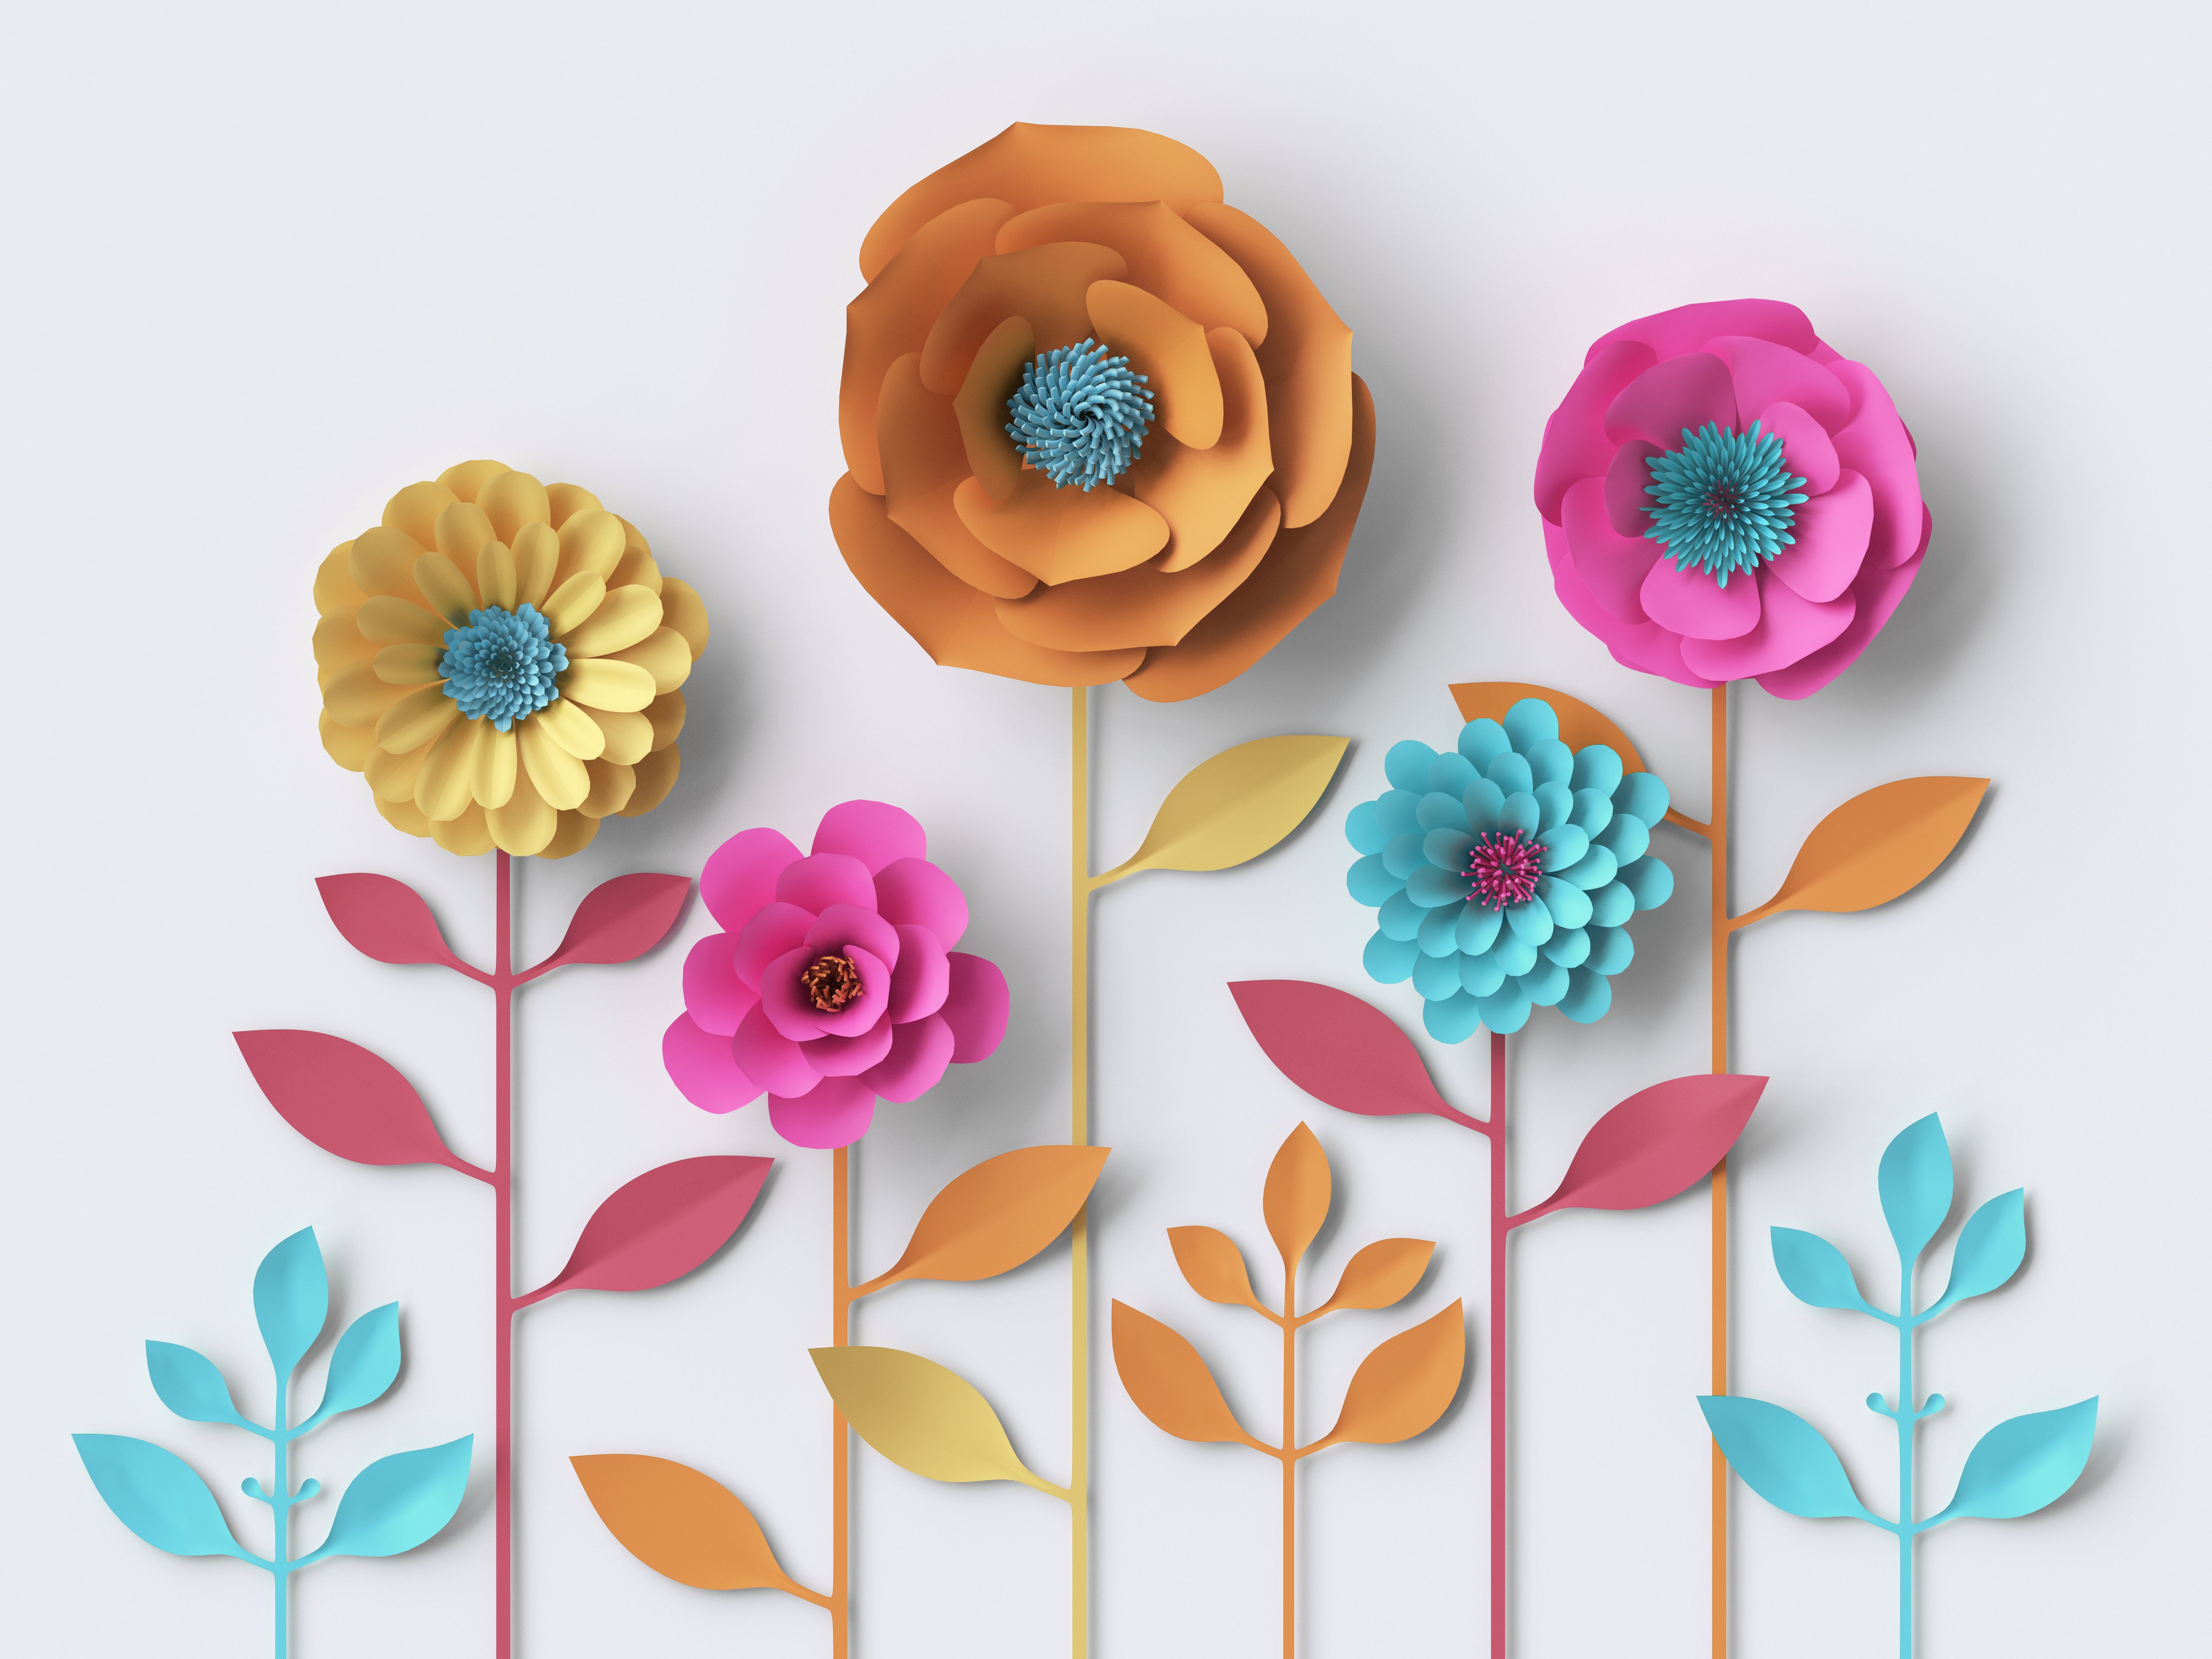 Colourful paper flowers